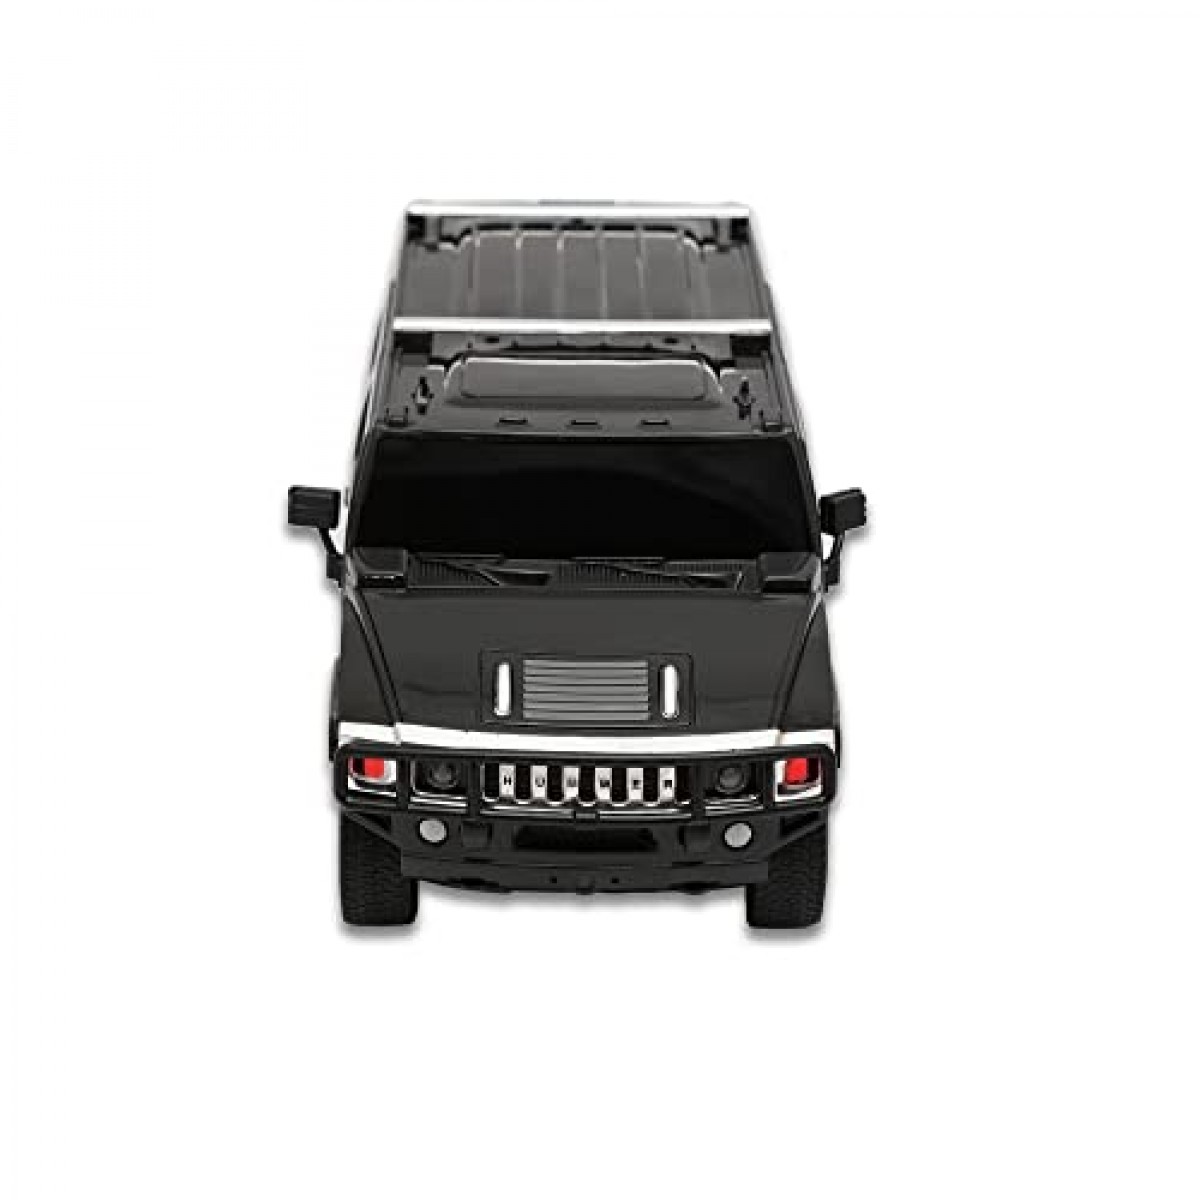 Road Burner Rechargable Remote Control Car for Kids Hummer H2 Full Function, 1:24 Scale Pack of 1, Black, Age 6Y+